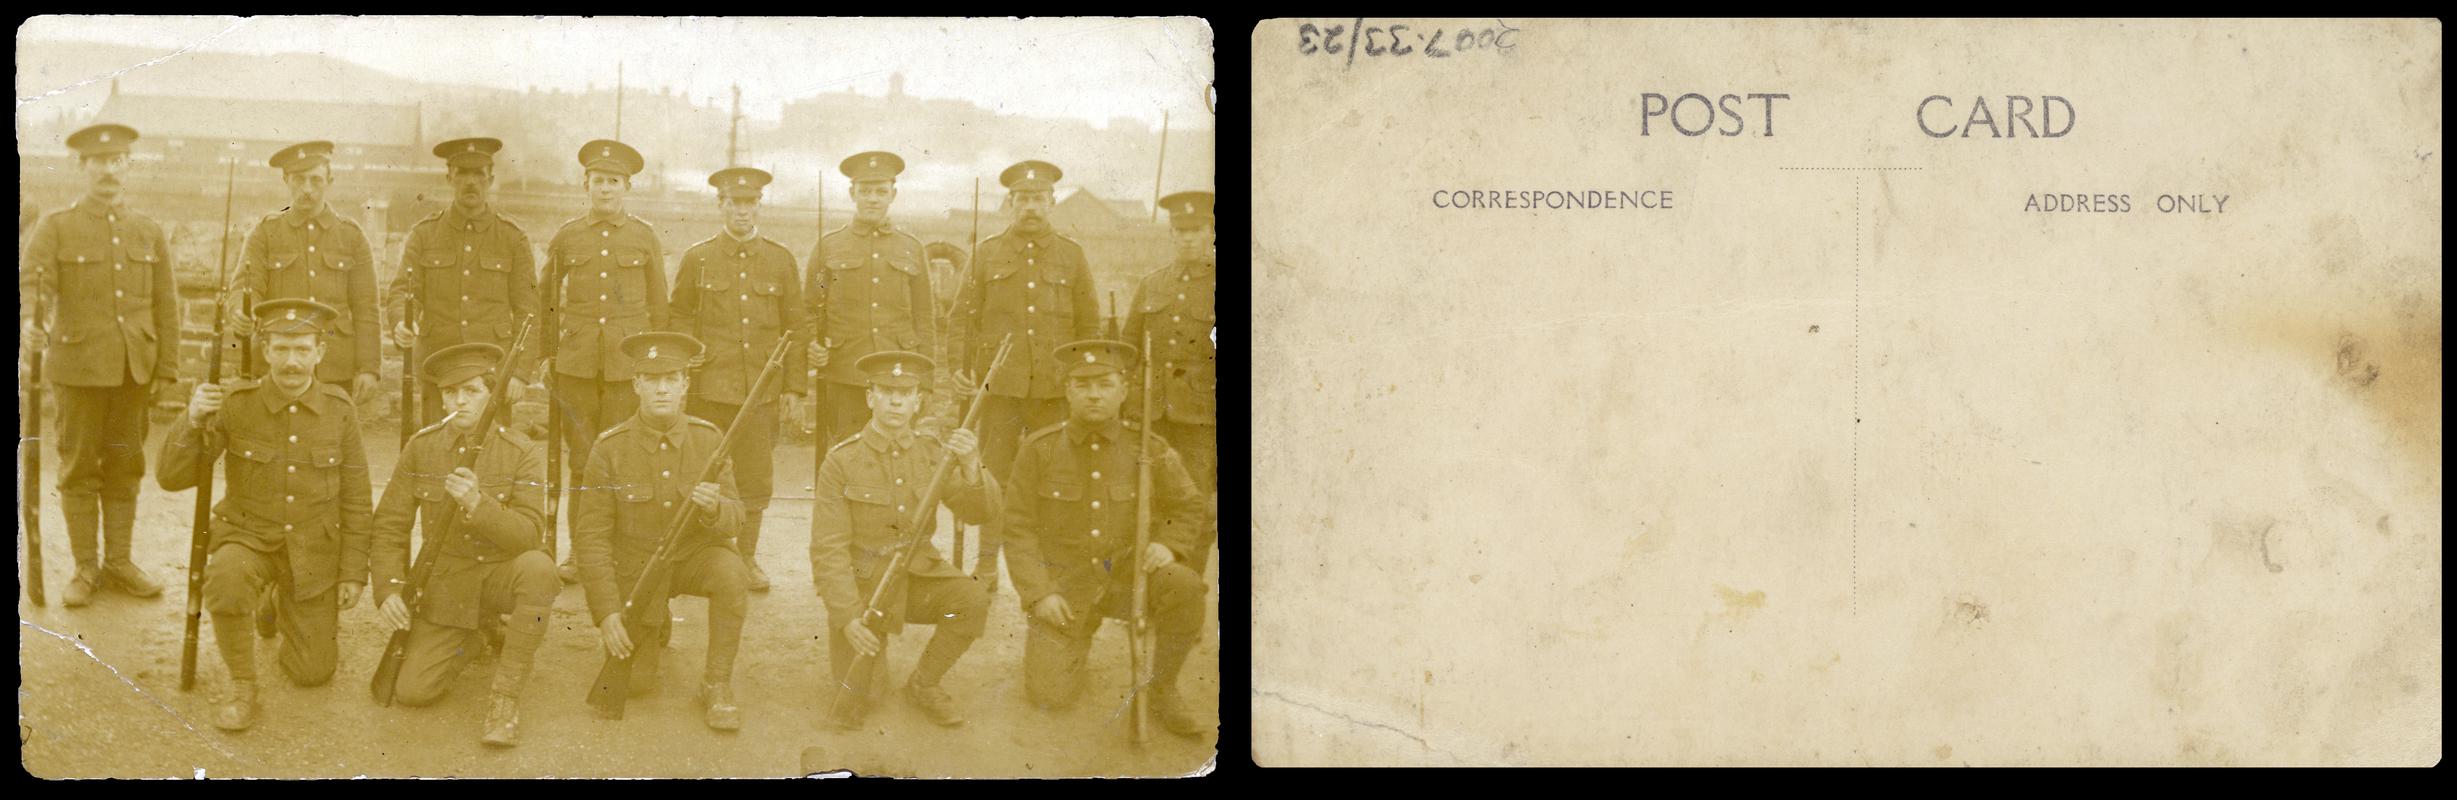 Group of 13 soldiers holding rifles (front &amp; Back)